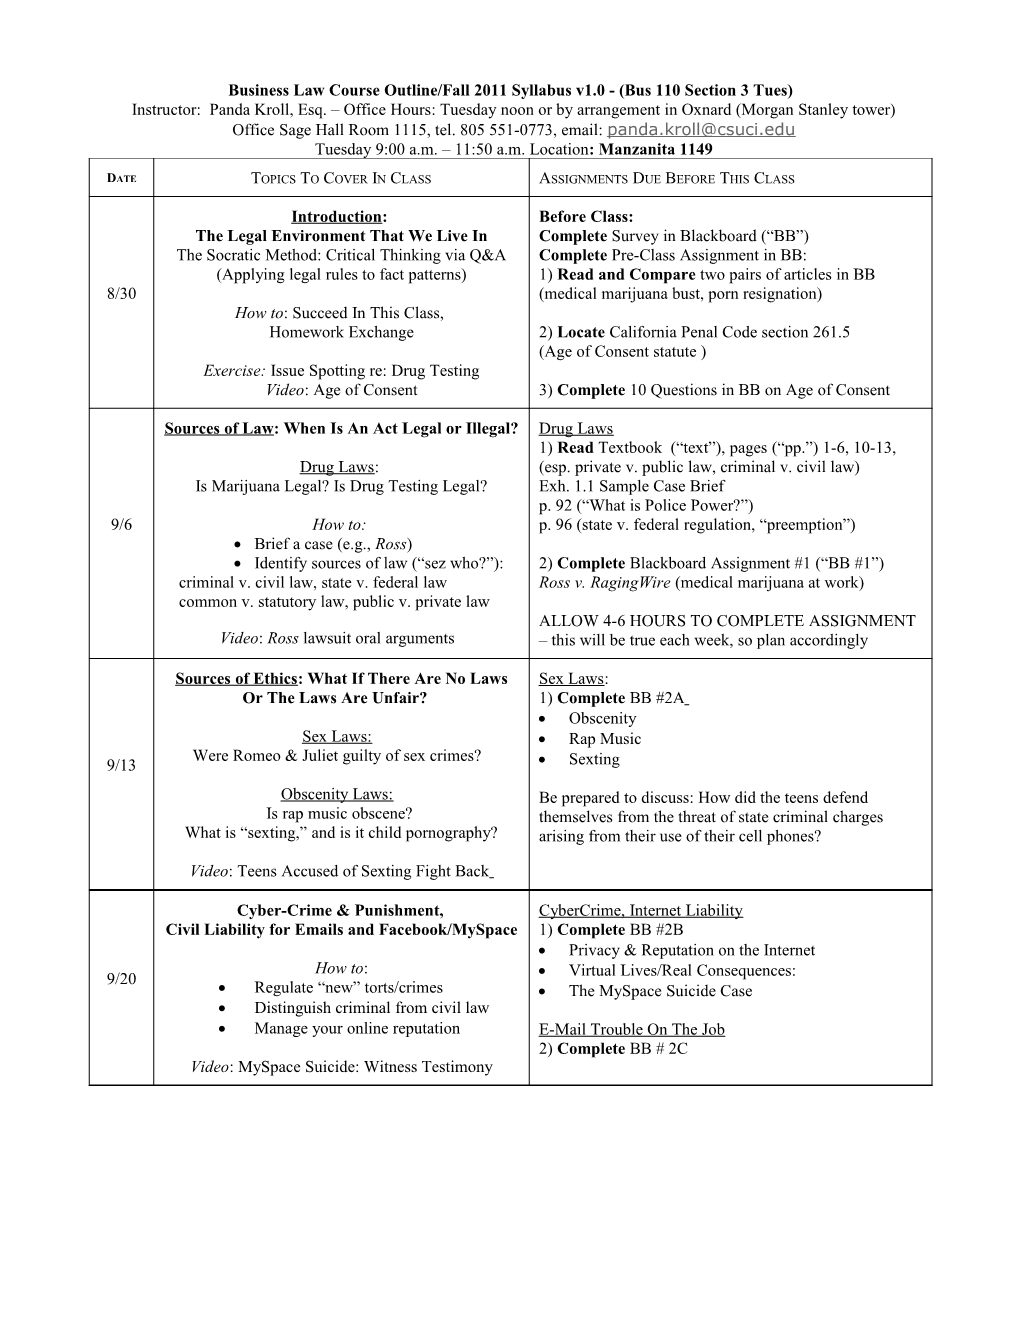 Business Law Course Outline, Fall 2008 (Bus 110 Sections 1 and 2) Syllabus Version 1 s1